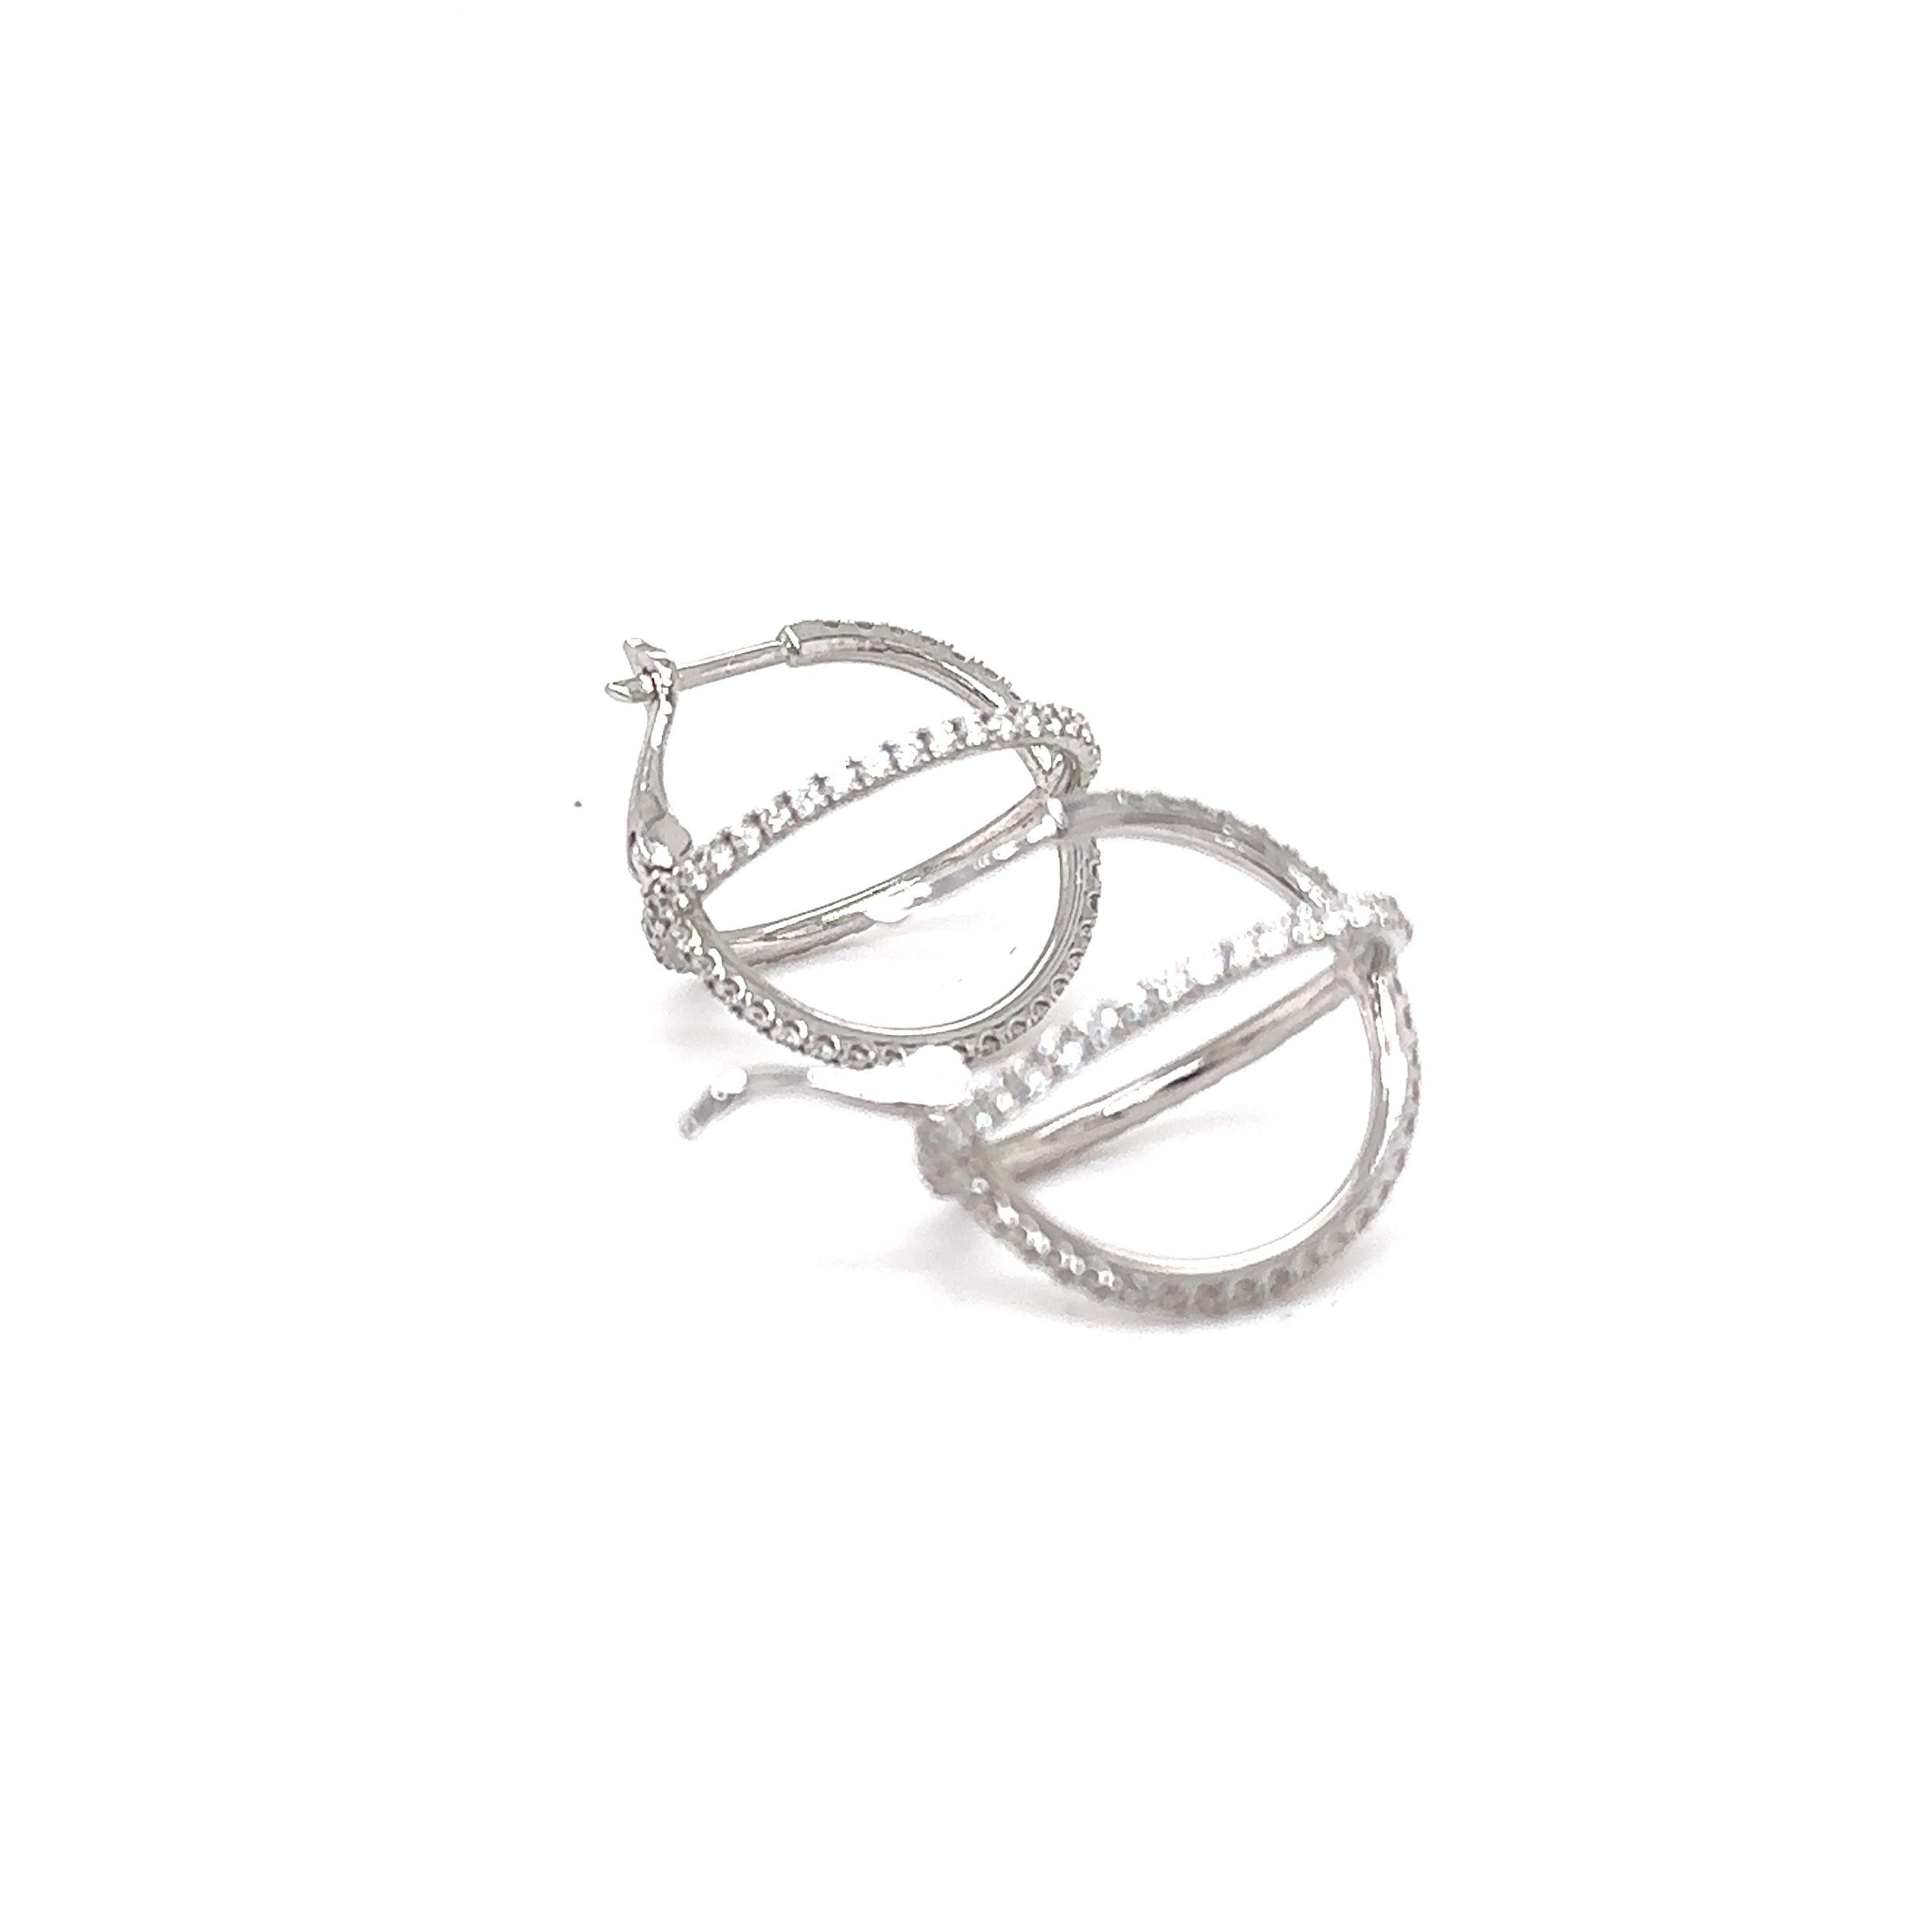 18K White Gold Round X Hoop Earrings

Metal: 18K White Gold
Diamond Info: G/H SI, 142 Diamonds 1.30 CWT.
Total Ct Weight: 1.30 CWT.
Item Weight: 4.88 gm
Measurements:  18.80 mm
